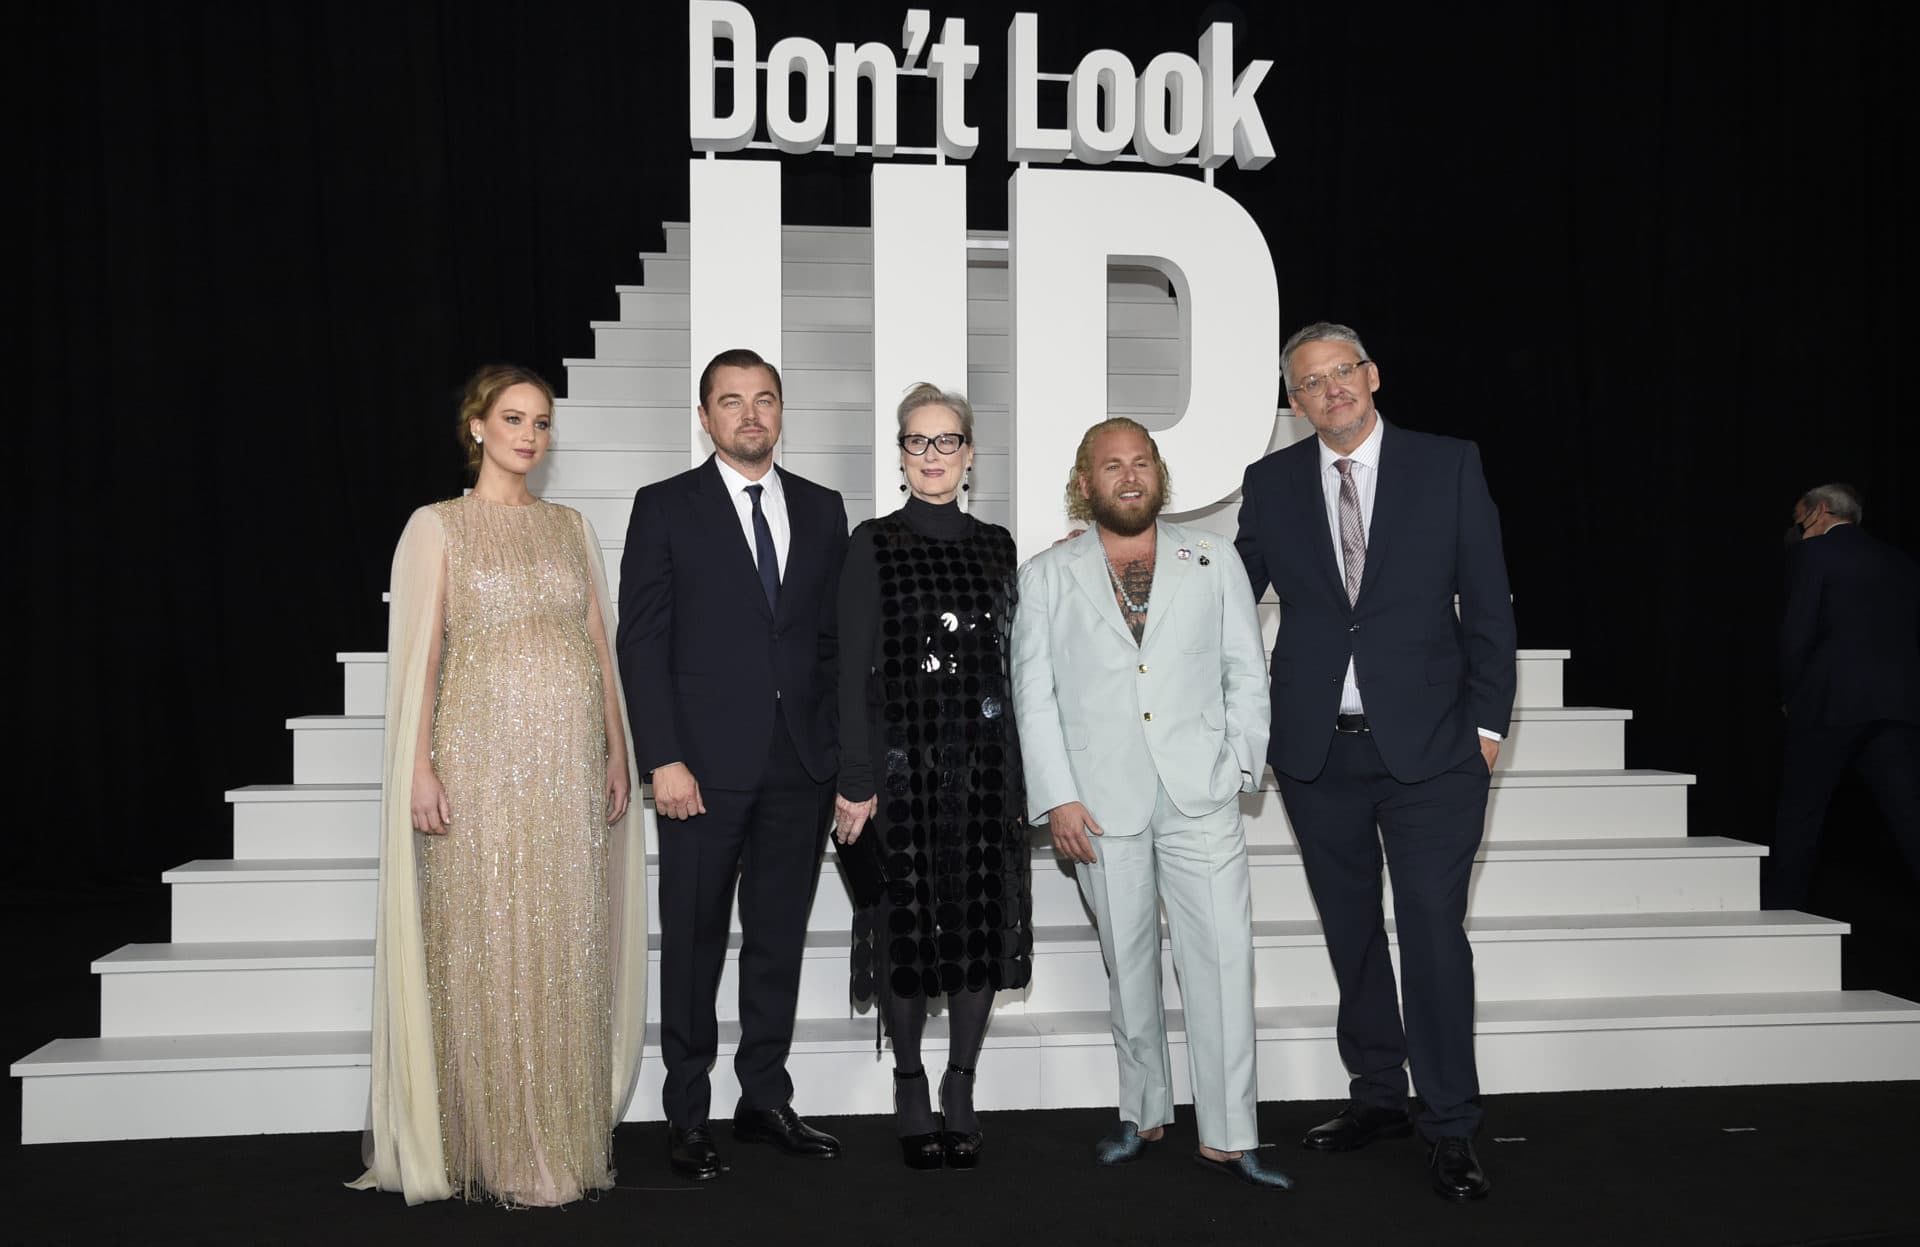 Jennifer Lawrence, from left, Leonardo DiCaprio, Meryl Streep, Jonah Hill, and writer/director Adam McKay attend the world premiere of "Don't Look Up" at Jazz at Lincoln Center on Sunday, Dec. 5, 2021, in New York. (Evan Agostini/Invision/AP)